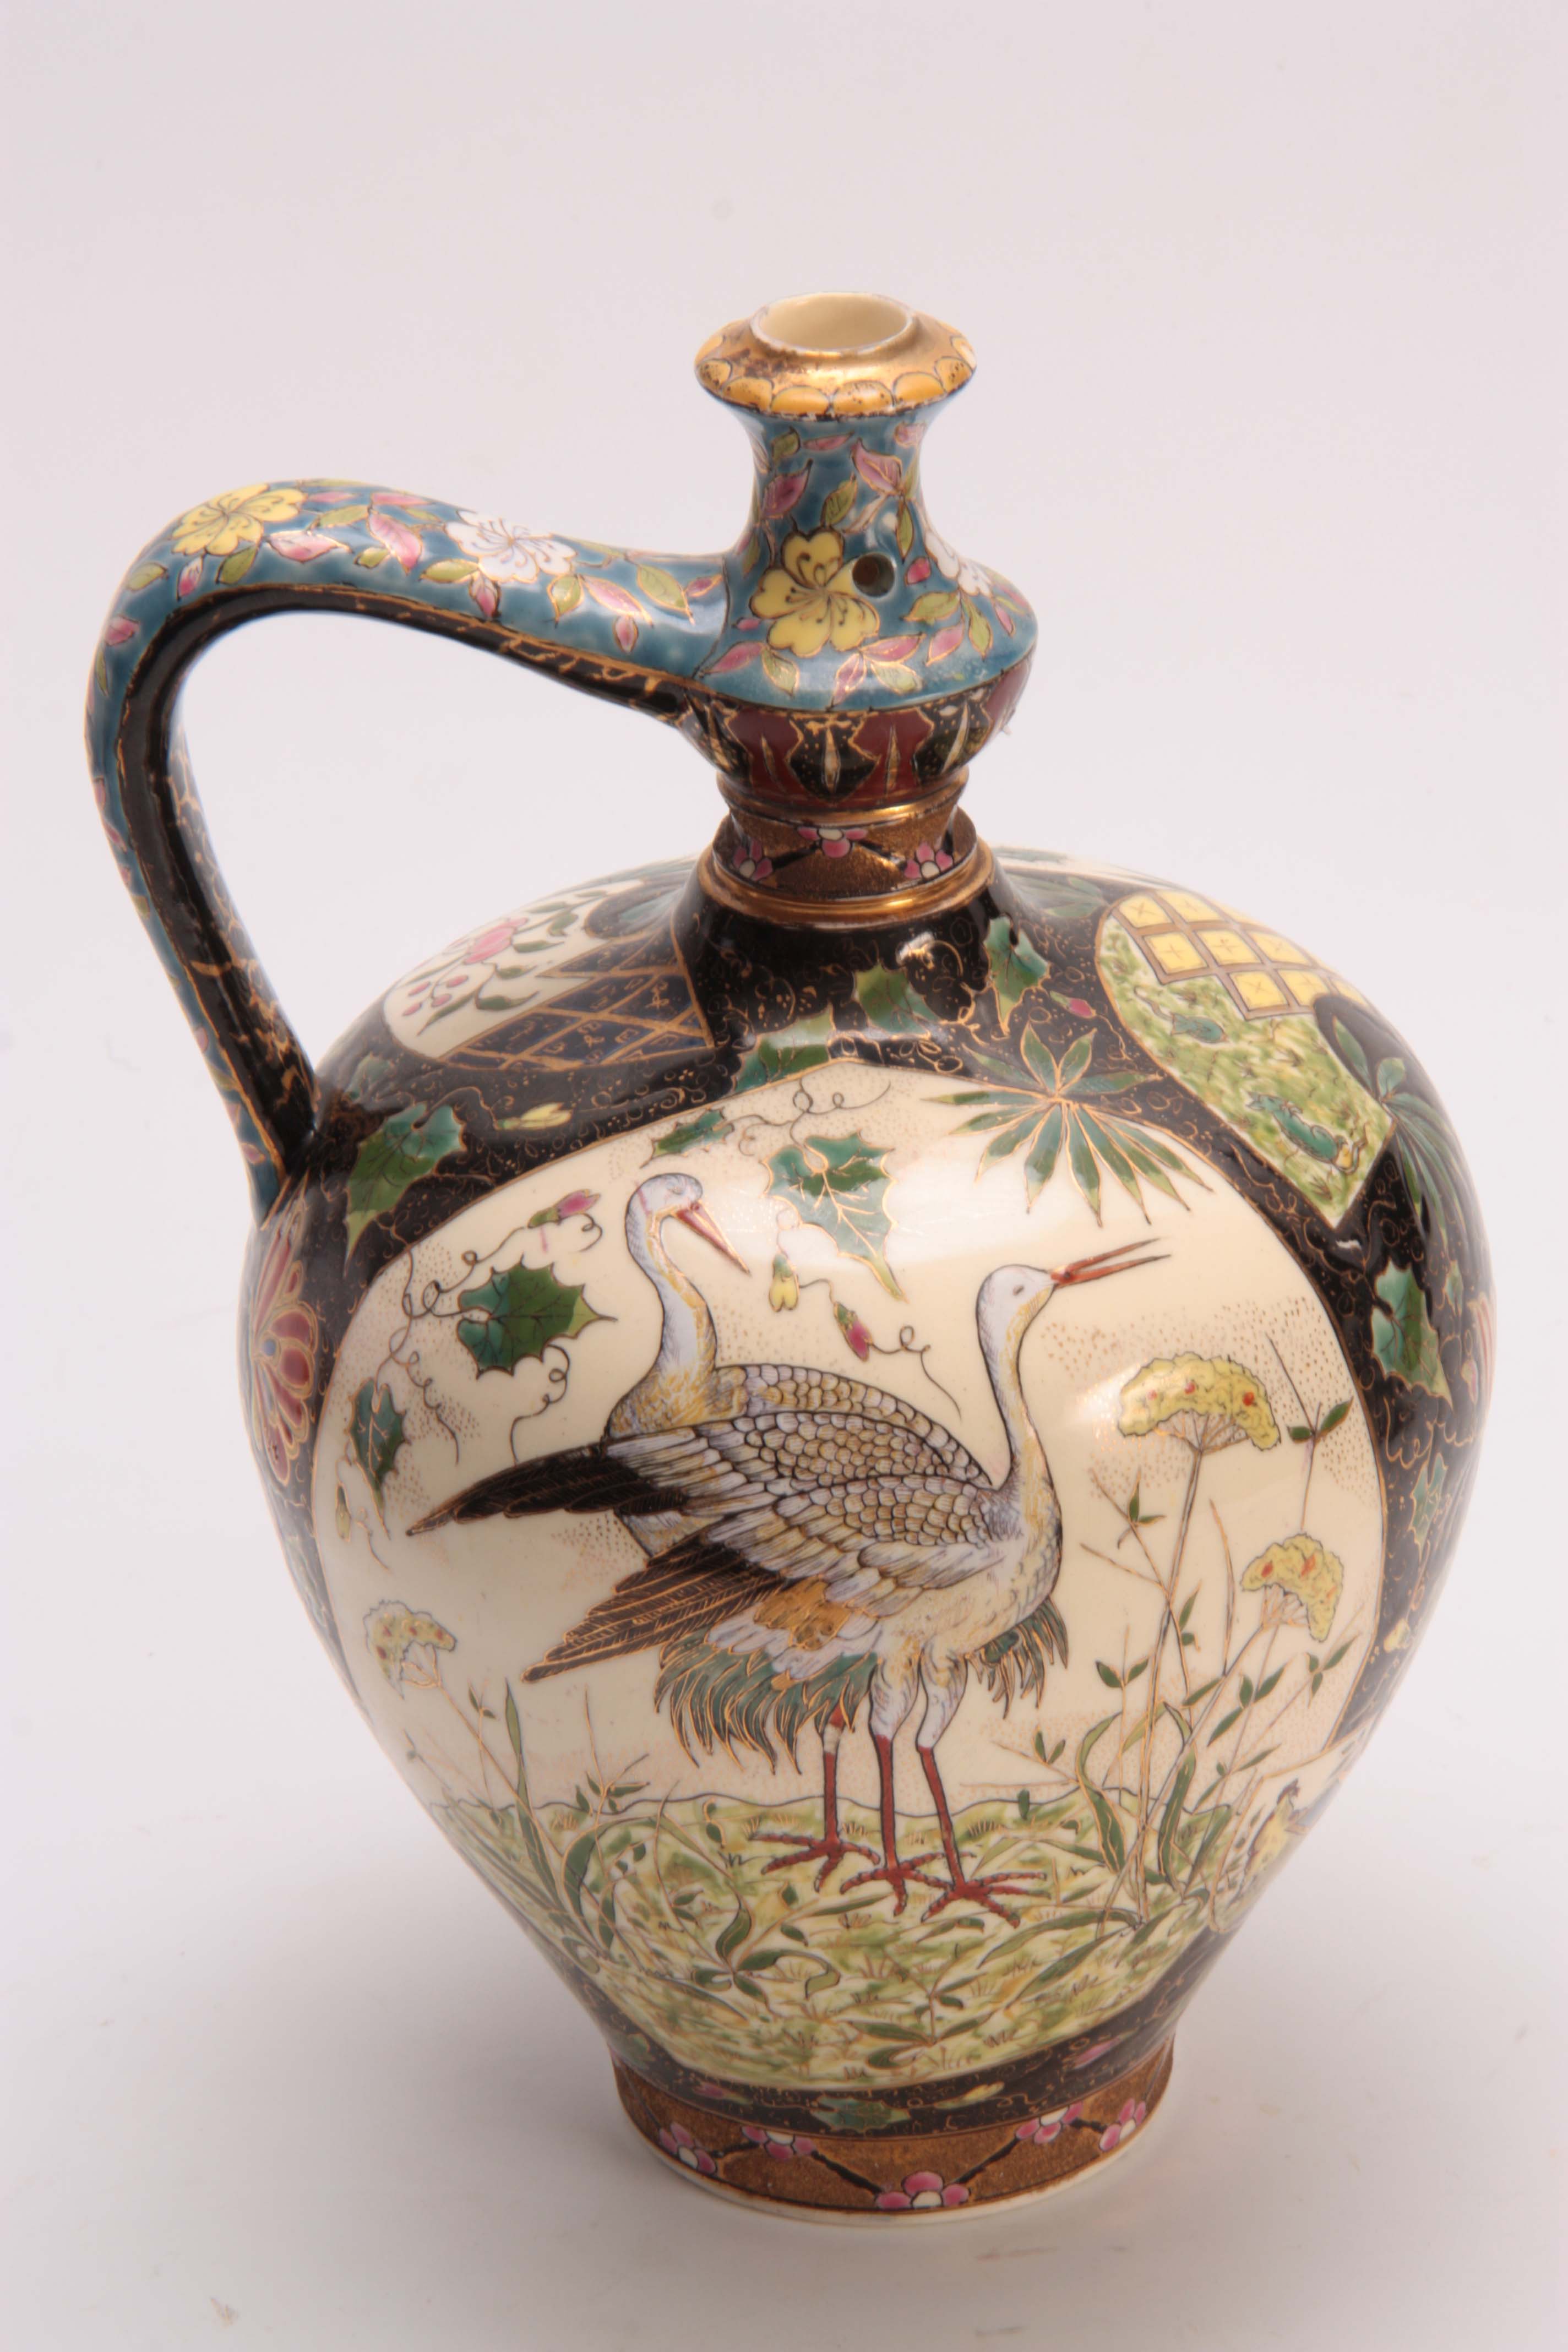 AN EARLY 20TH CENTURY HUNGARIAN FISCHER BUDAPEST WATER JUG decorated with birds and floral work - Image 4 of 5